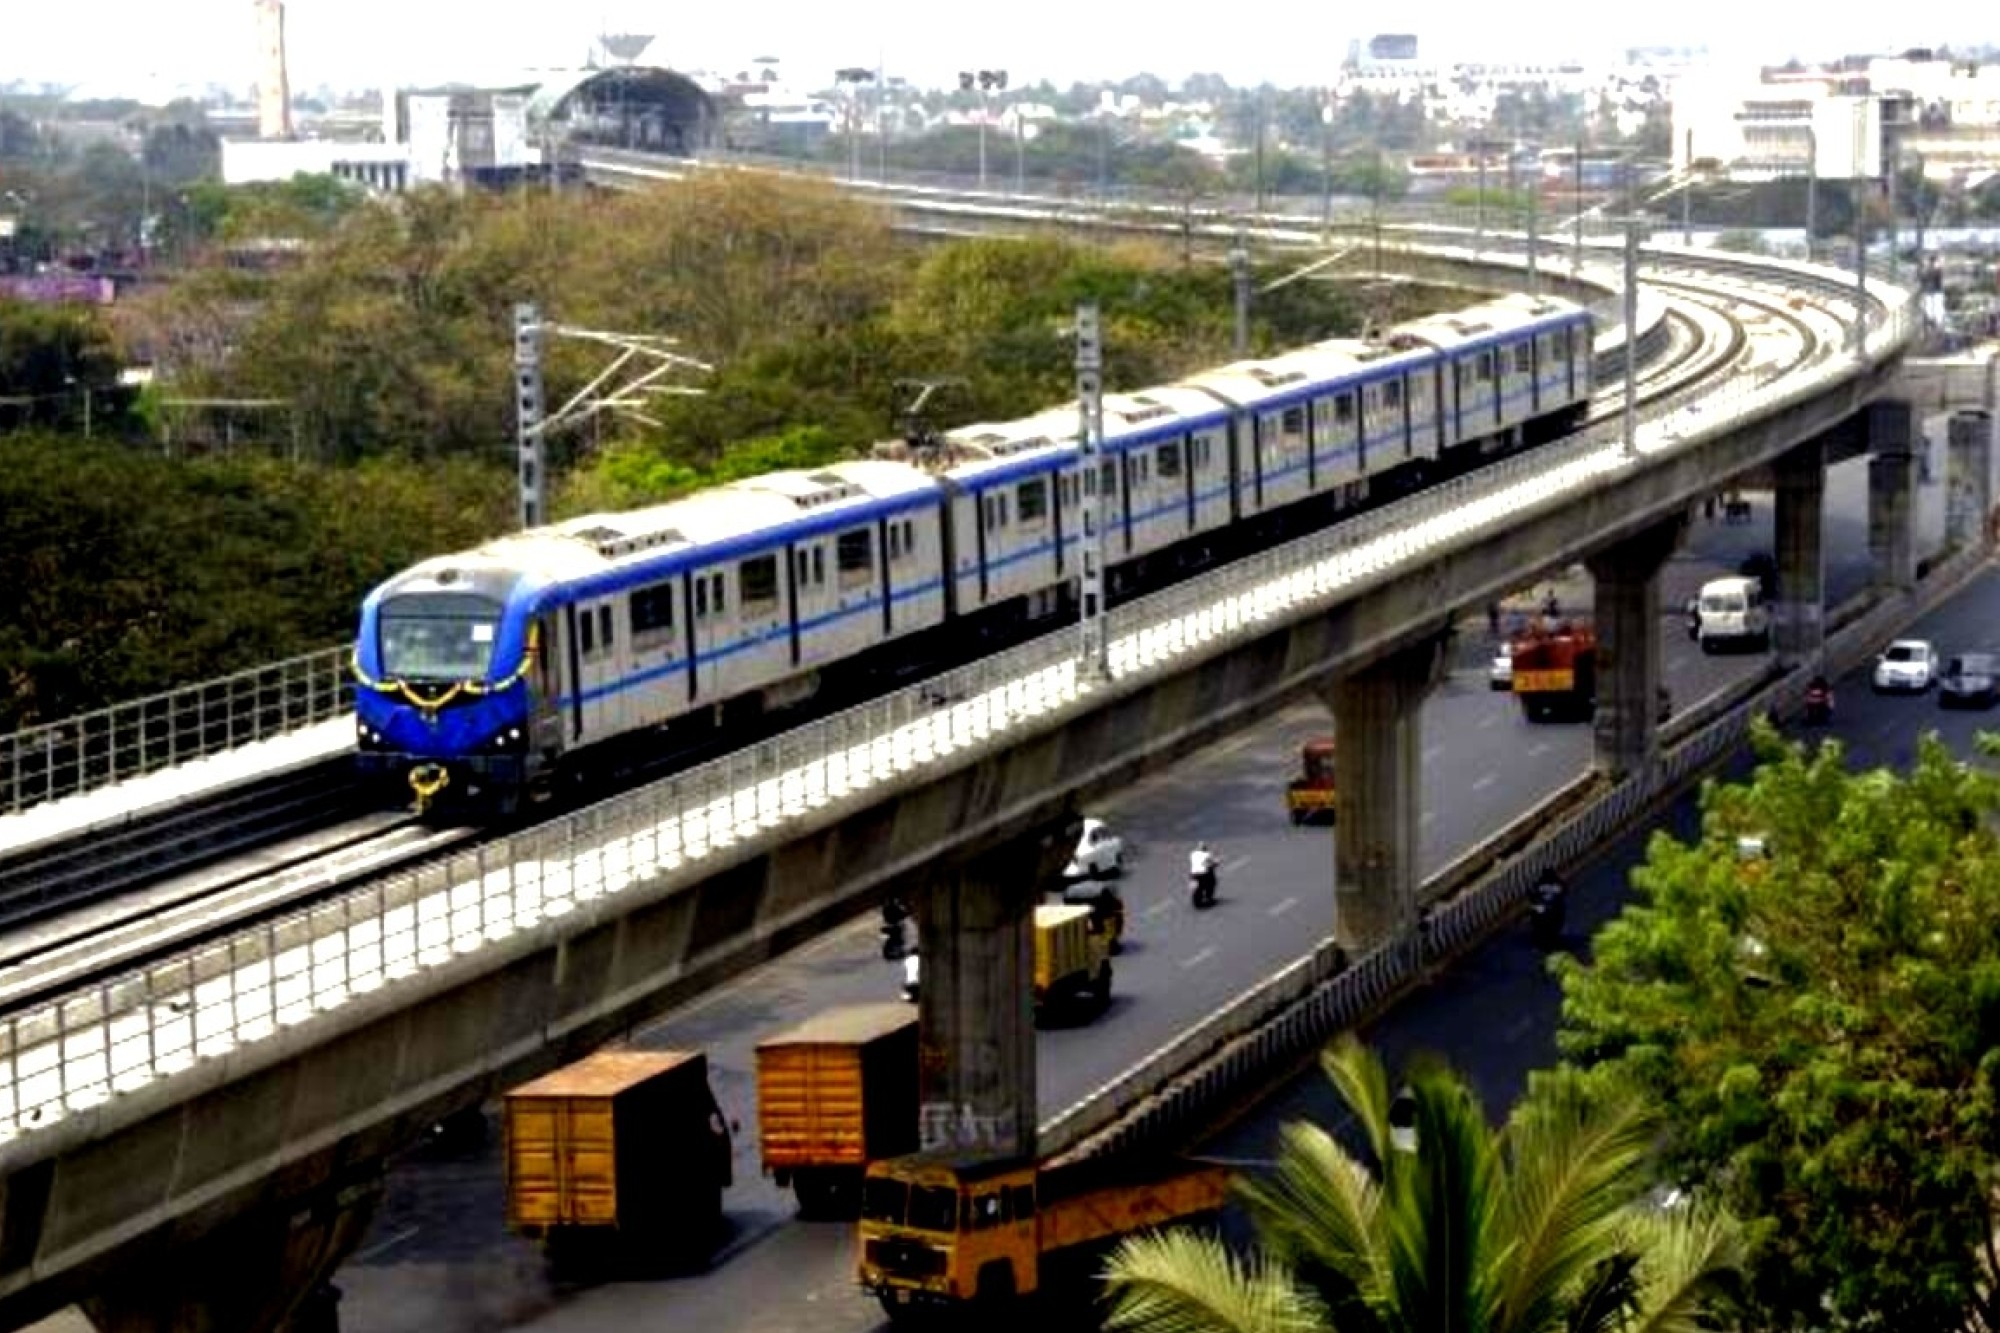 A significant stride in Mumbai's metro network expansion has been achieved with the announcement of the CEG-KNR Joint Venture securing the general consultant contract for constructing the Kanjurmarg Depot for Mumbai Metro Line 6.